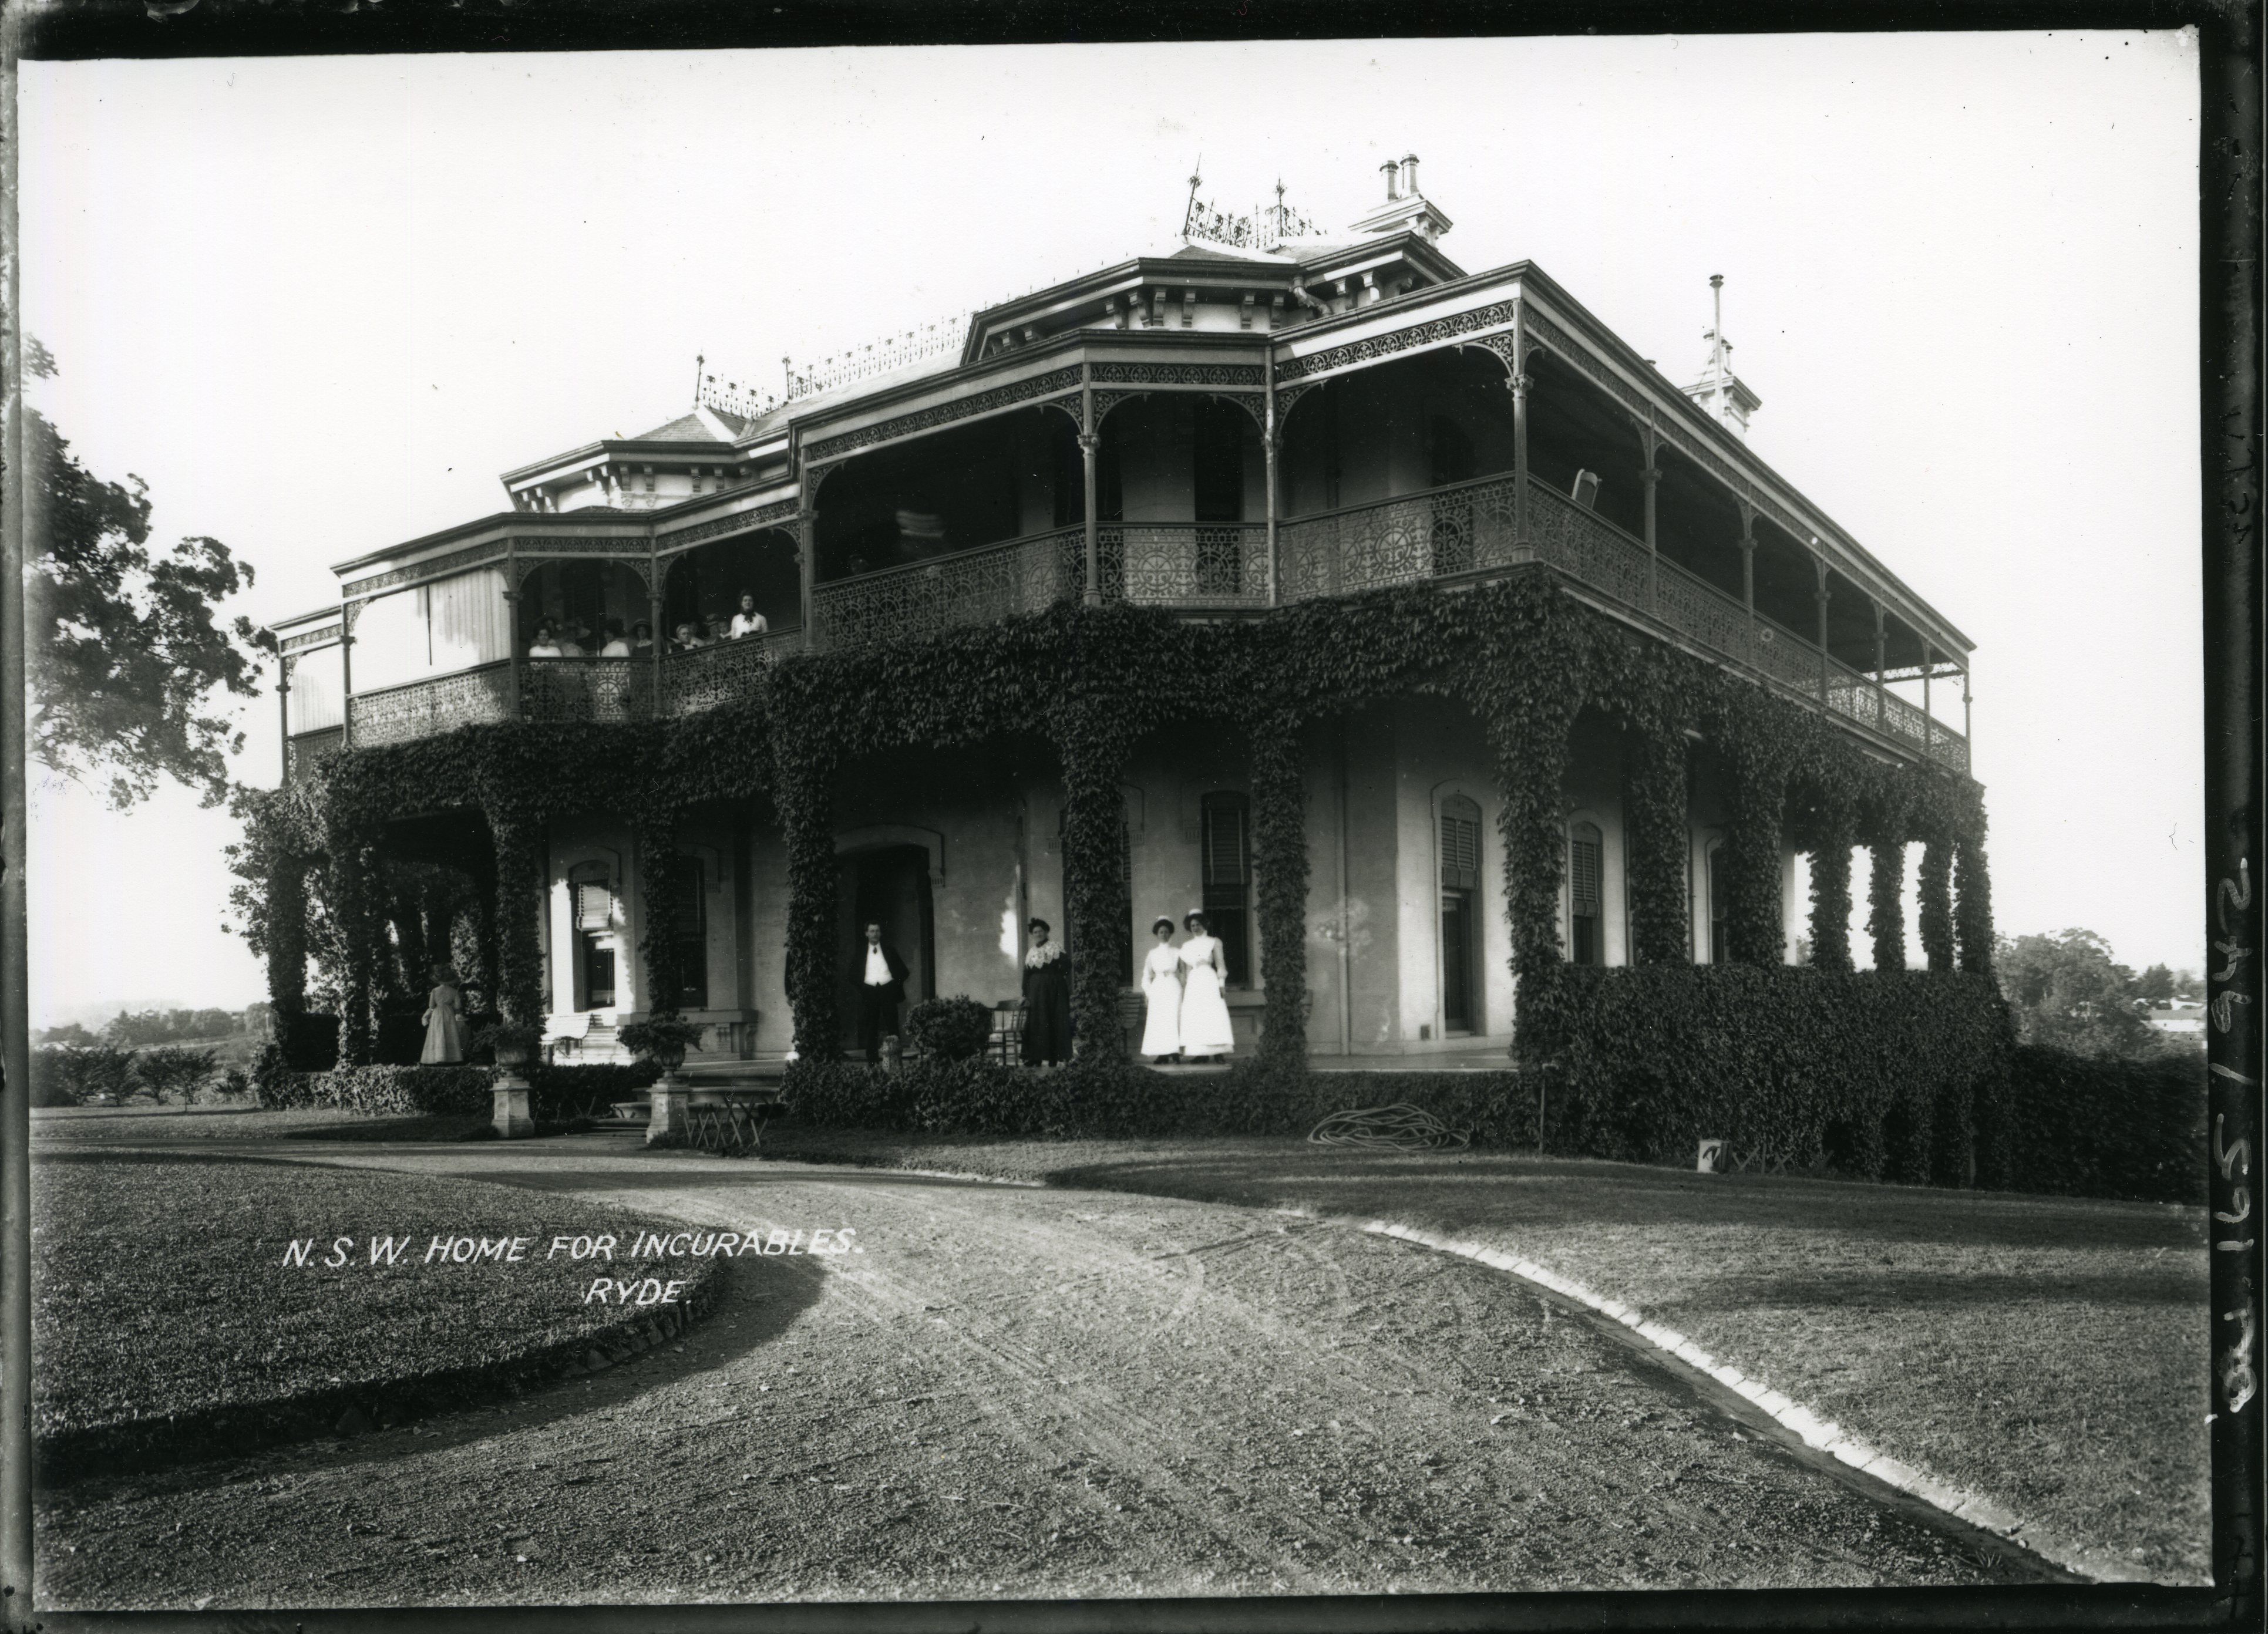 Image 4 of 4 - Black and white photo of a large two-story house with a wraparound balcony and veranda. Standing on the veranda and balcony are nurses and patients.